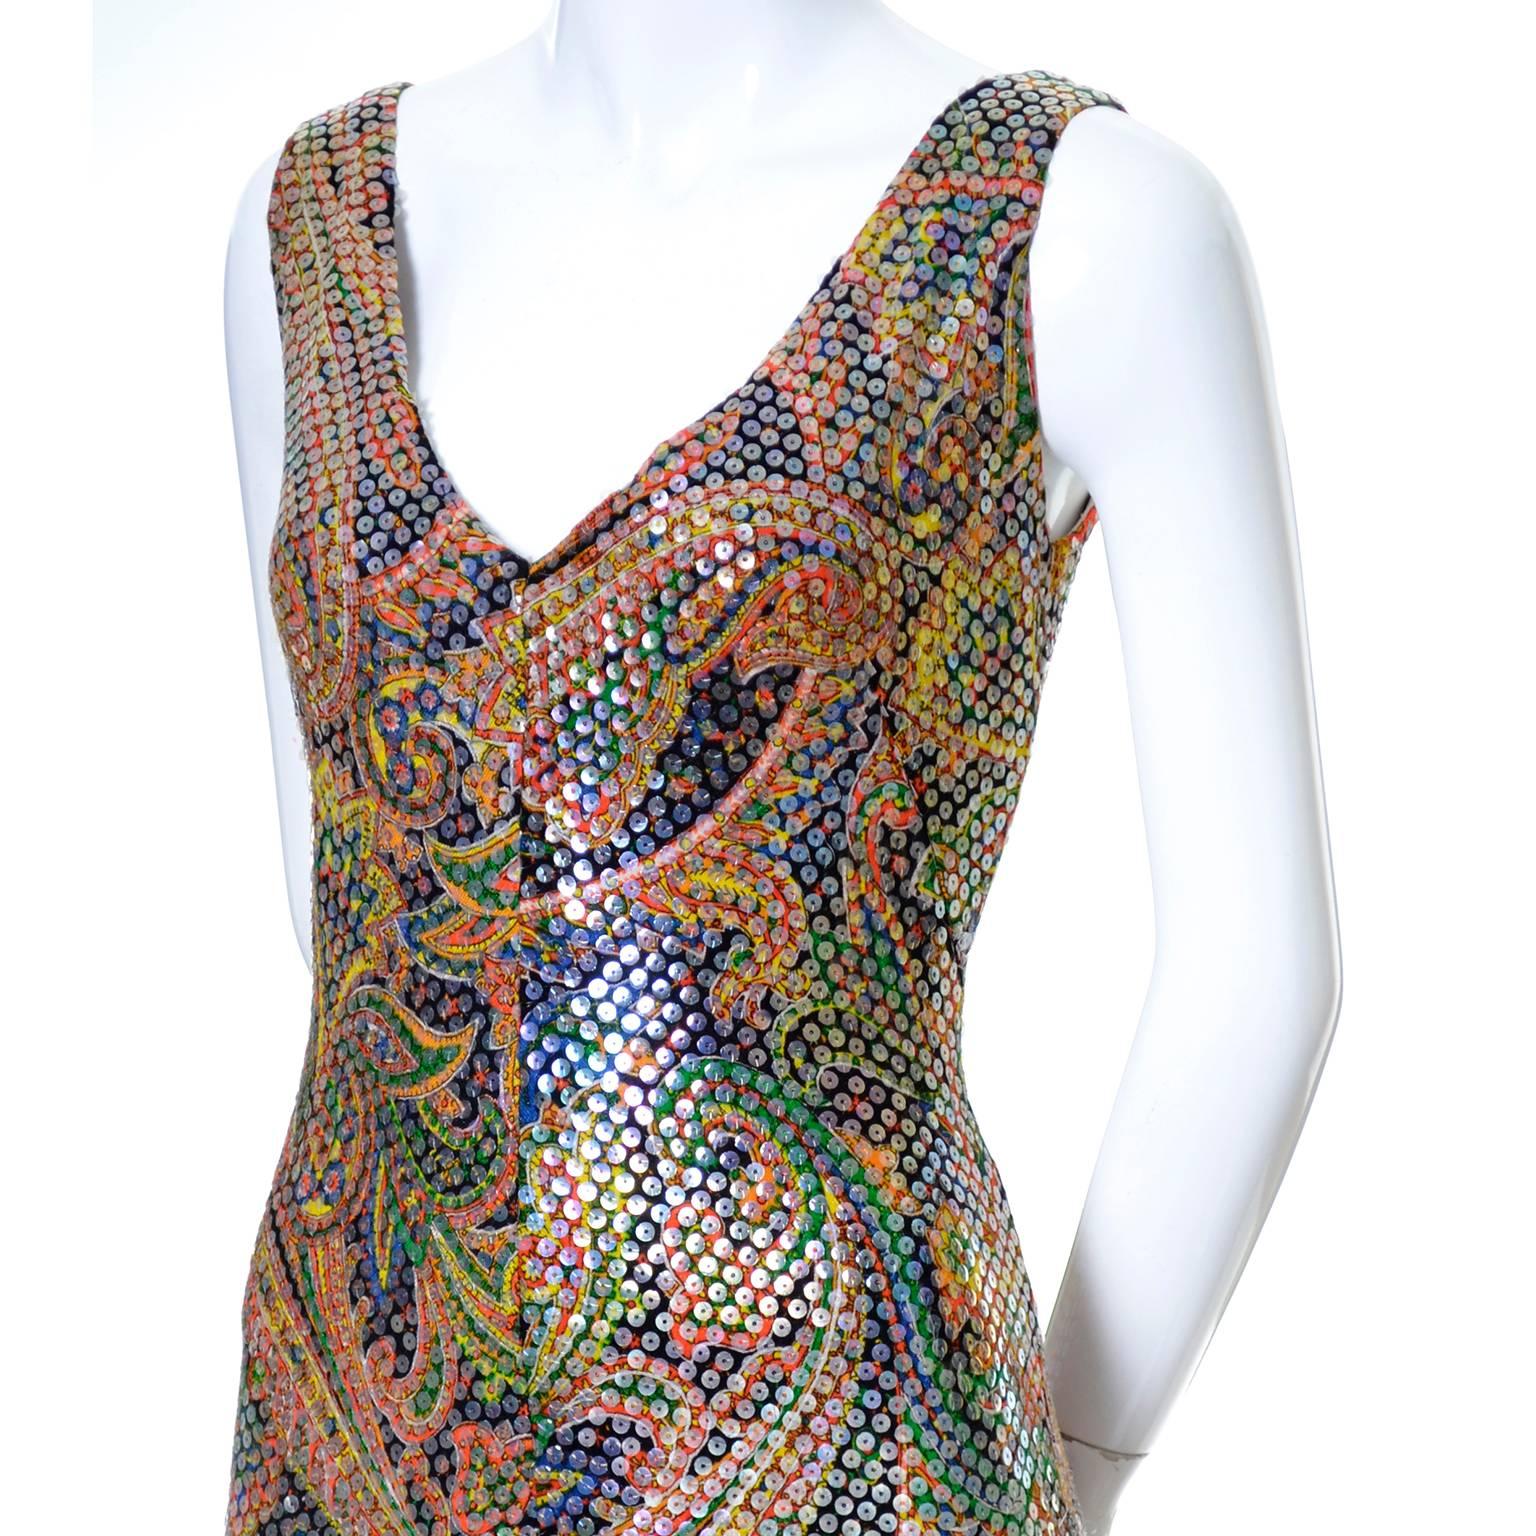 This fab vintage dress was made in paisley, lined in stretch jersey and is covered with sequins.  The dress was custom made in the 1970's and has a back zipper and low V neckline.  I would estimate this to be a modern day size 8/10 but please use